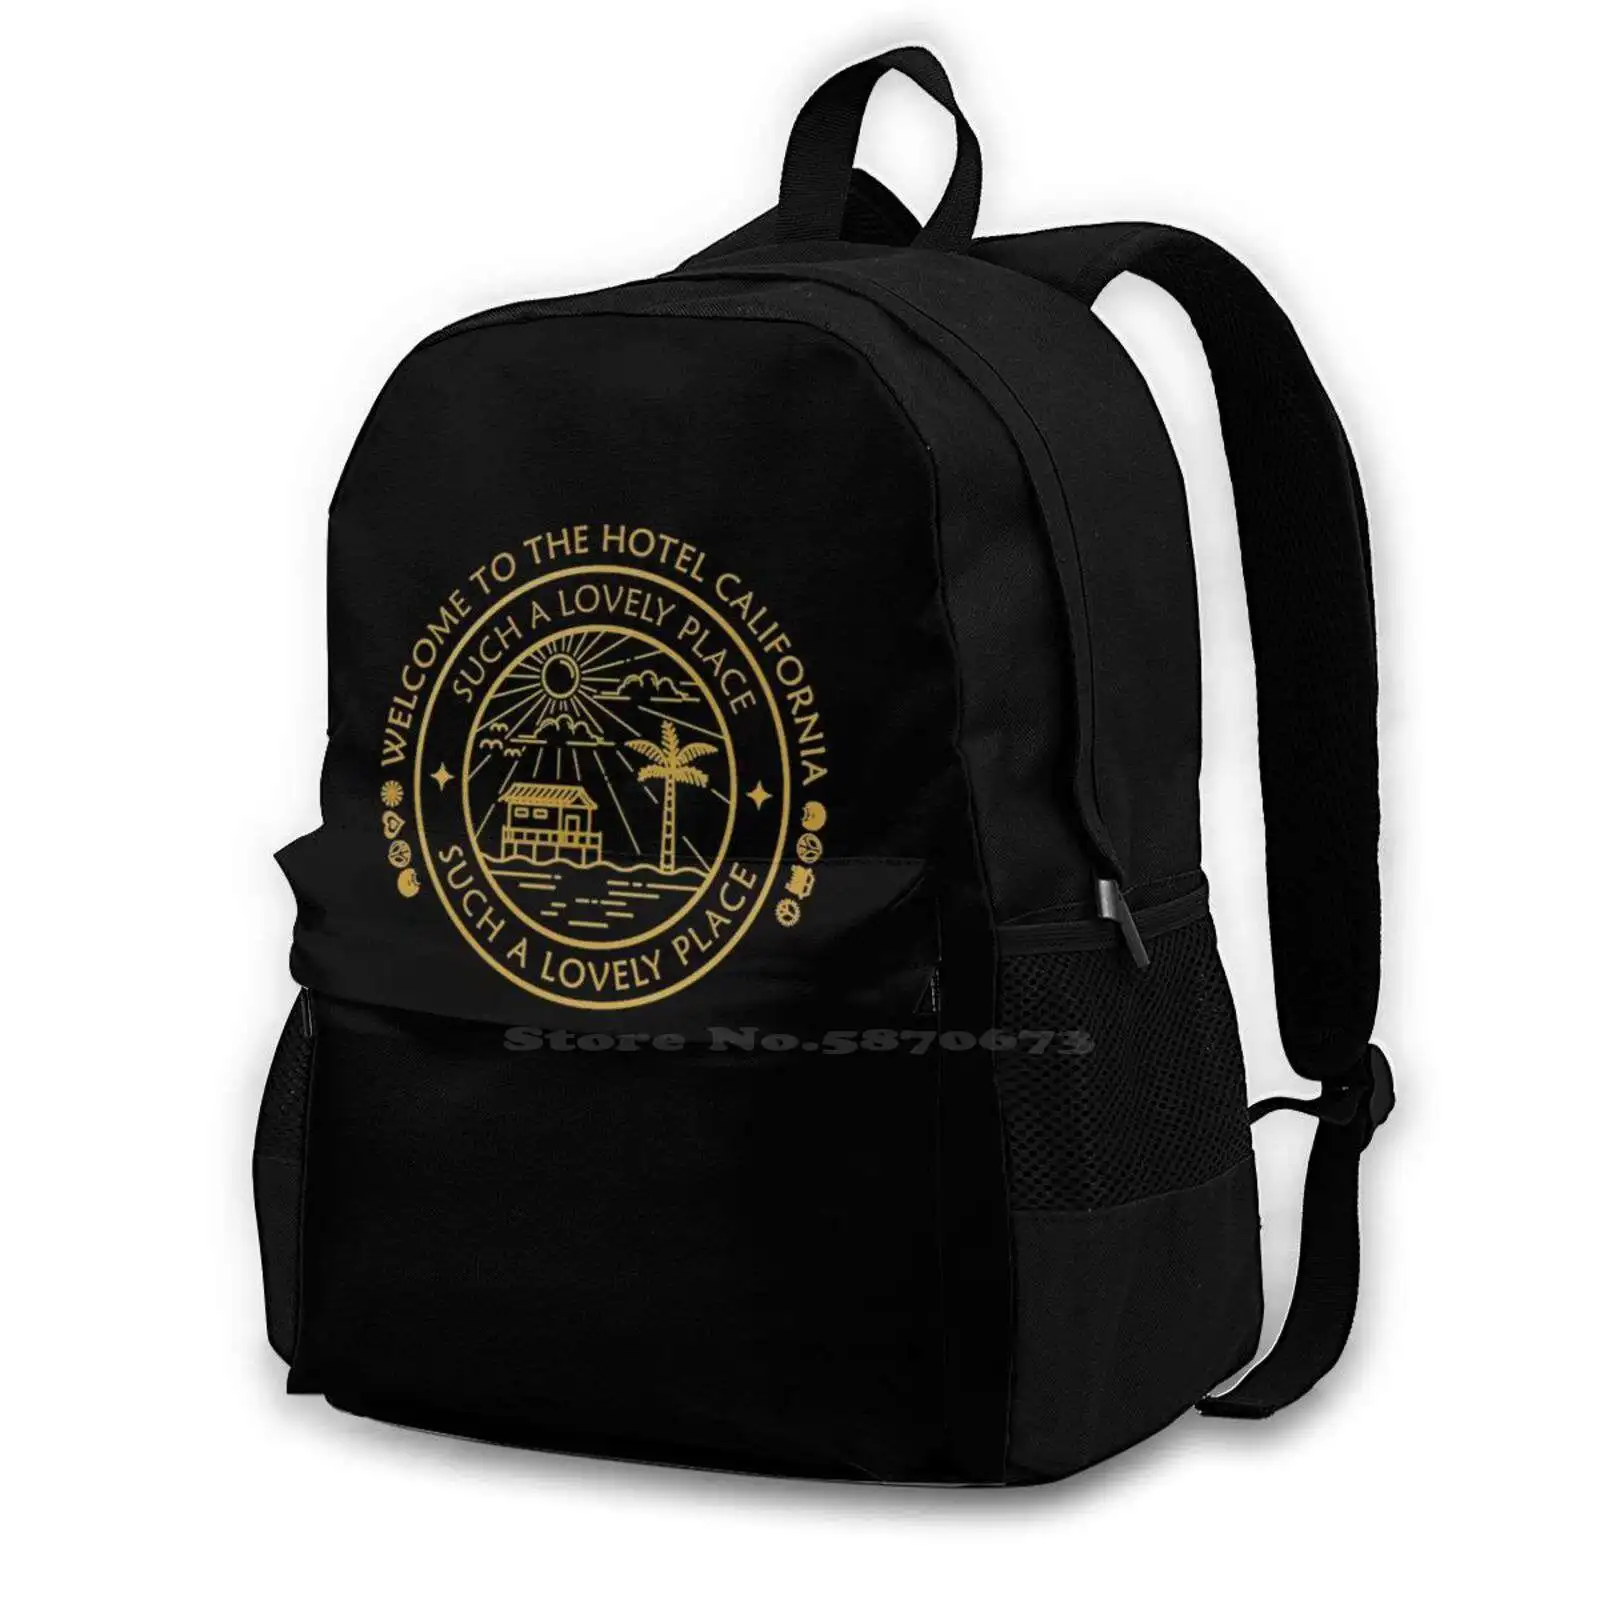 

The Such A Lovely Place - Vintage Gift Tee Fashion Travel Laptop School Backpack Bag California Hotel Tower Of Terror